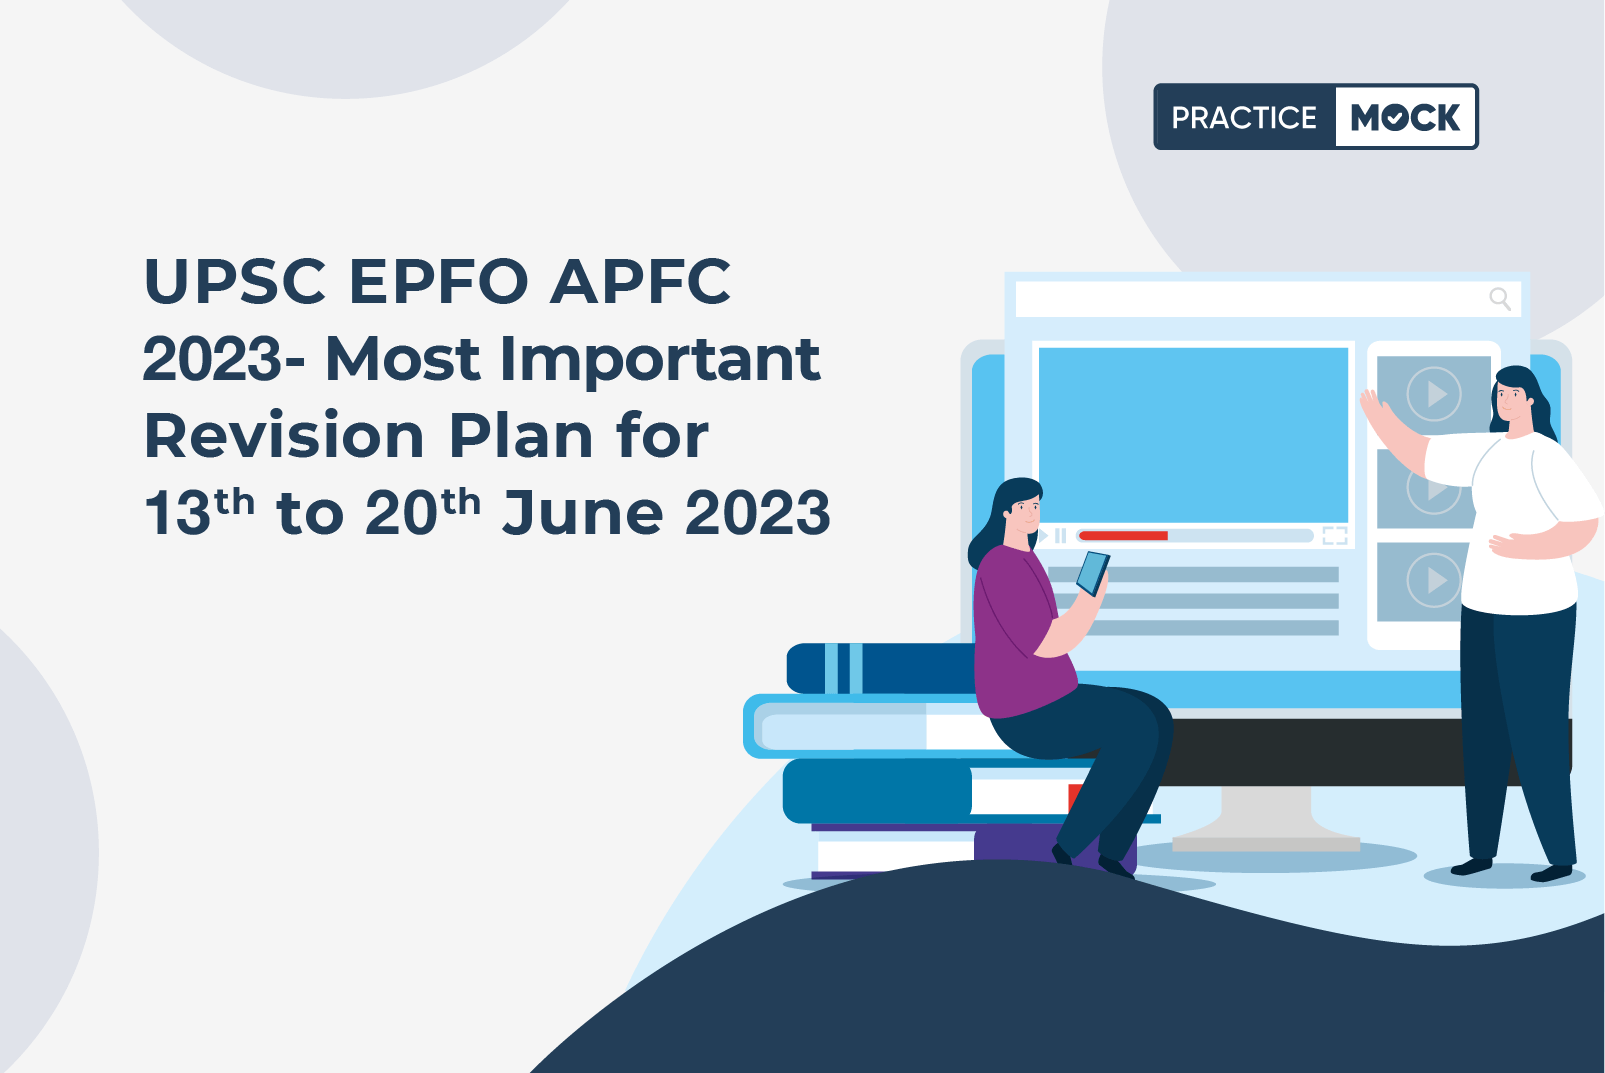 UPSC EPFO APFC 2023-Most Important Mock Test Challenge for 13th to 20th June 2023